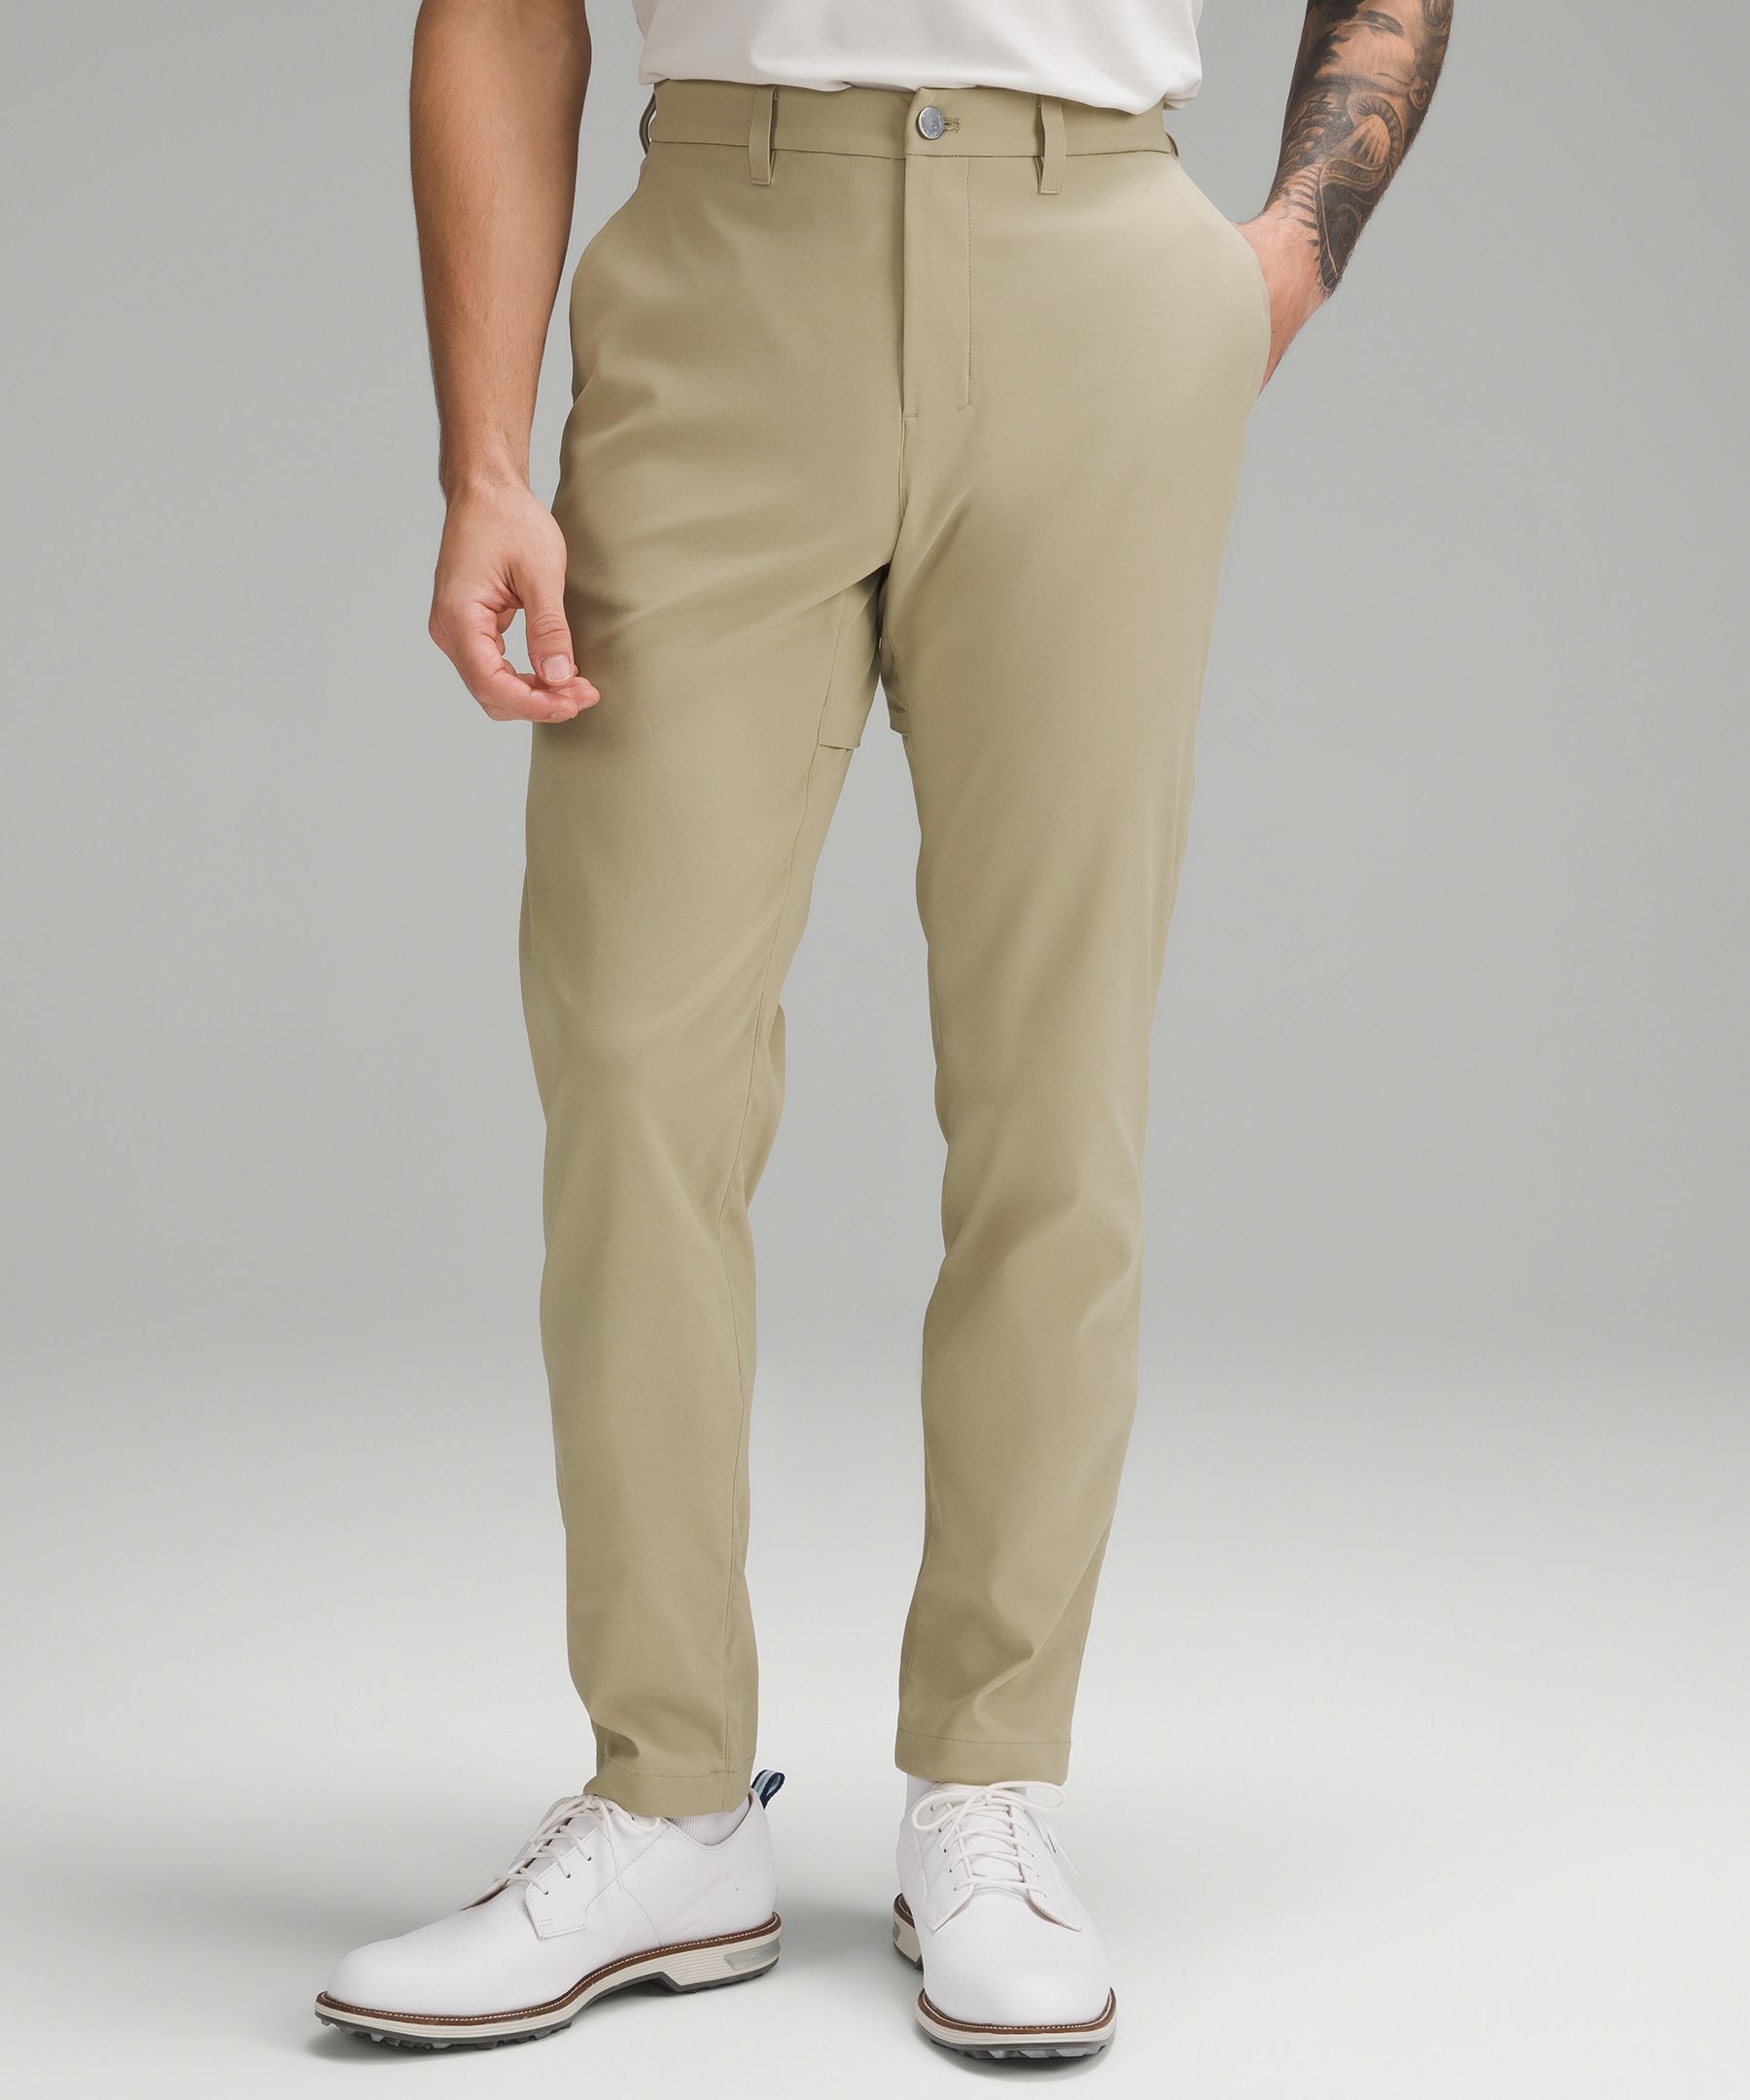 Mens Golf Pants All in Motion Butterscotch A2015